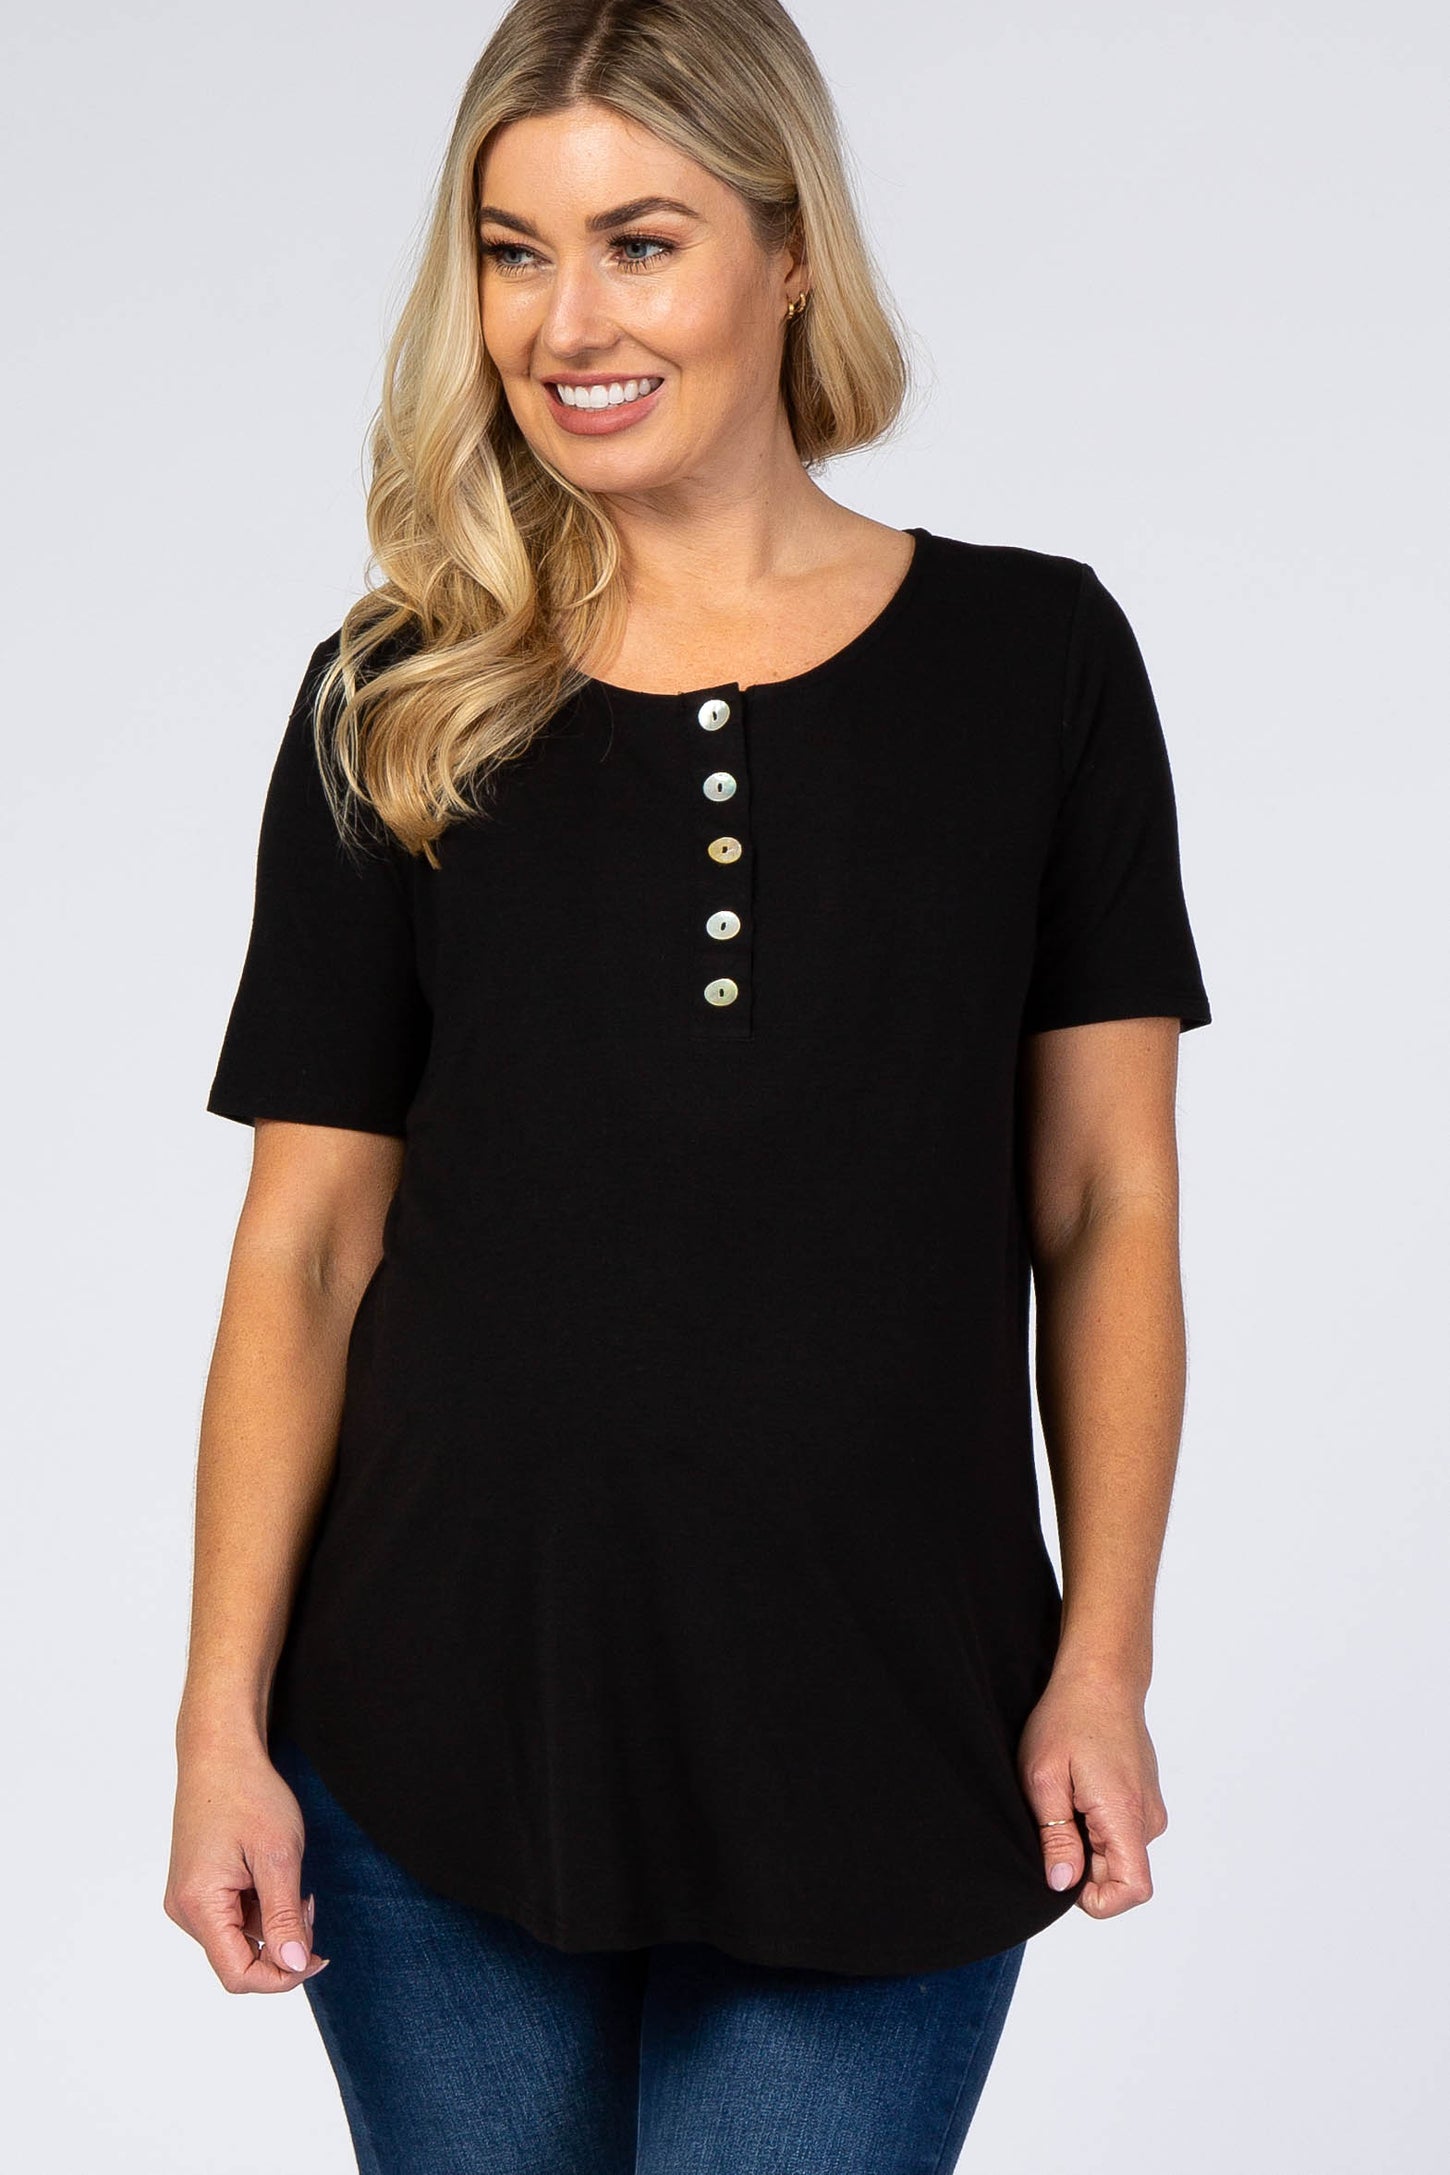 Black Button Down Short Sleeve Maternity Top